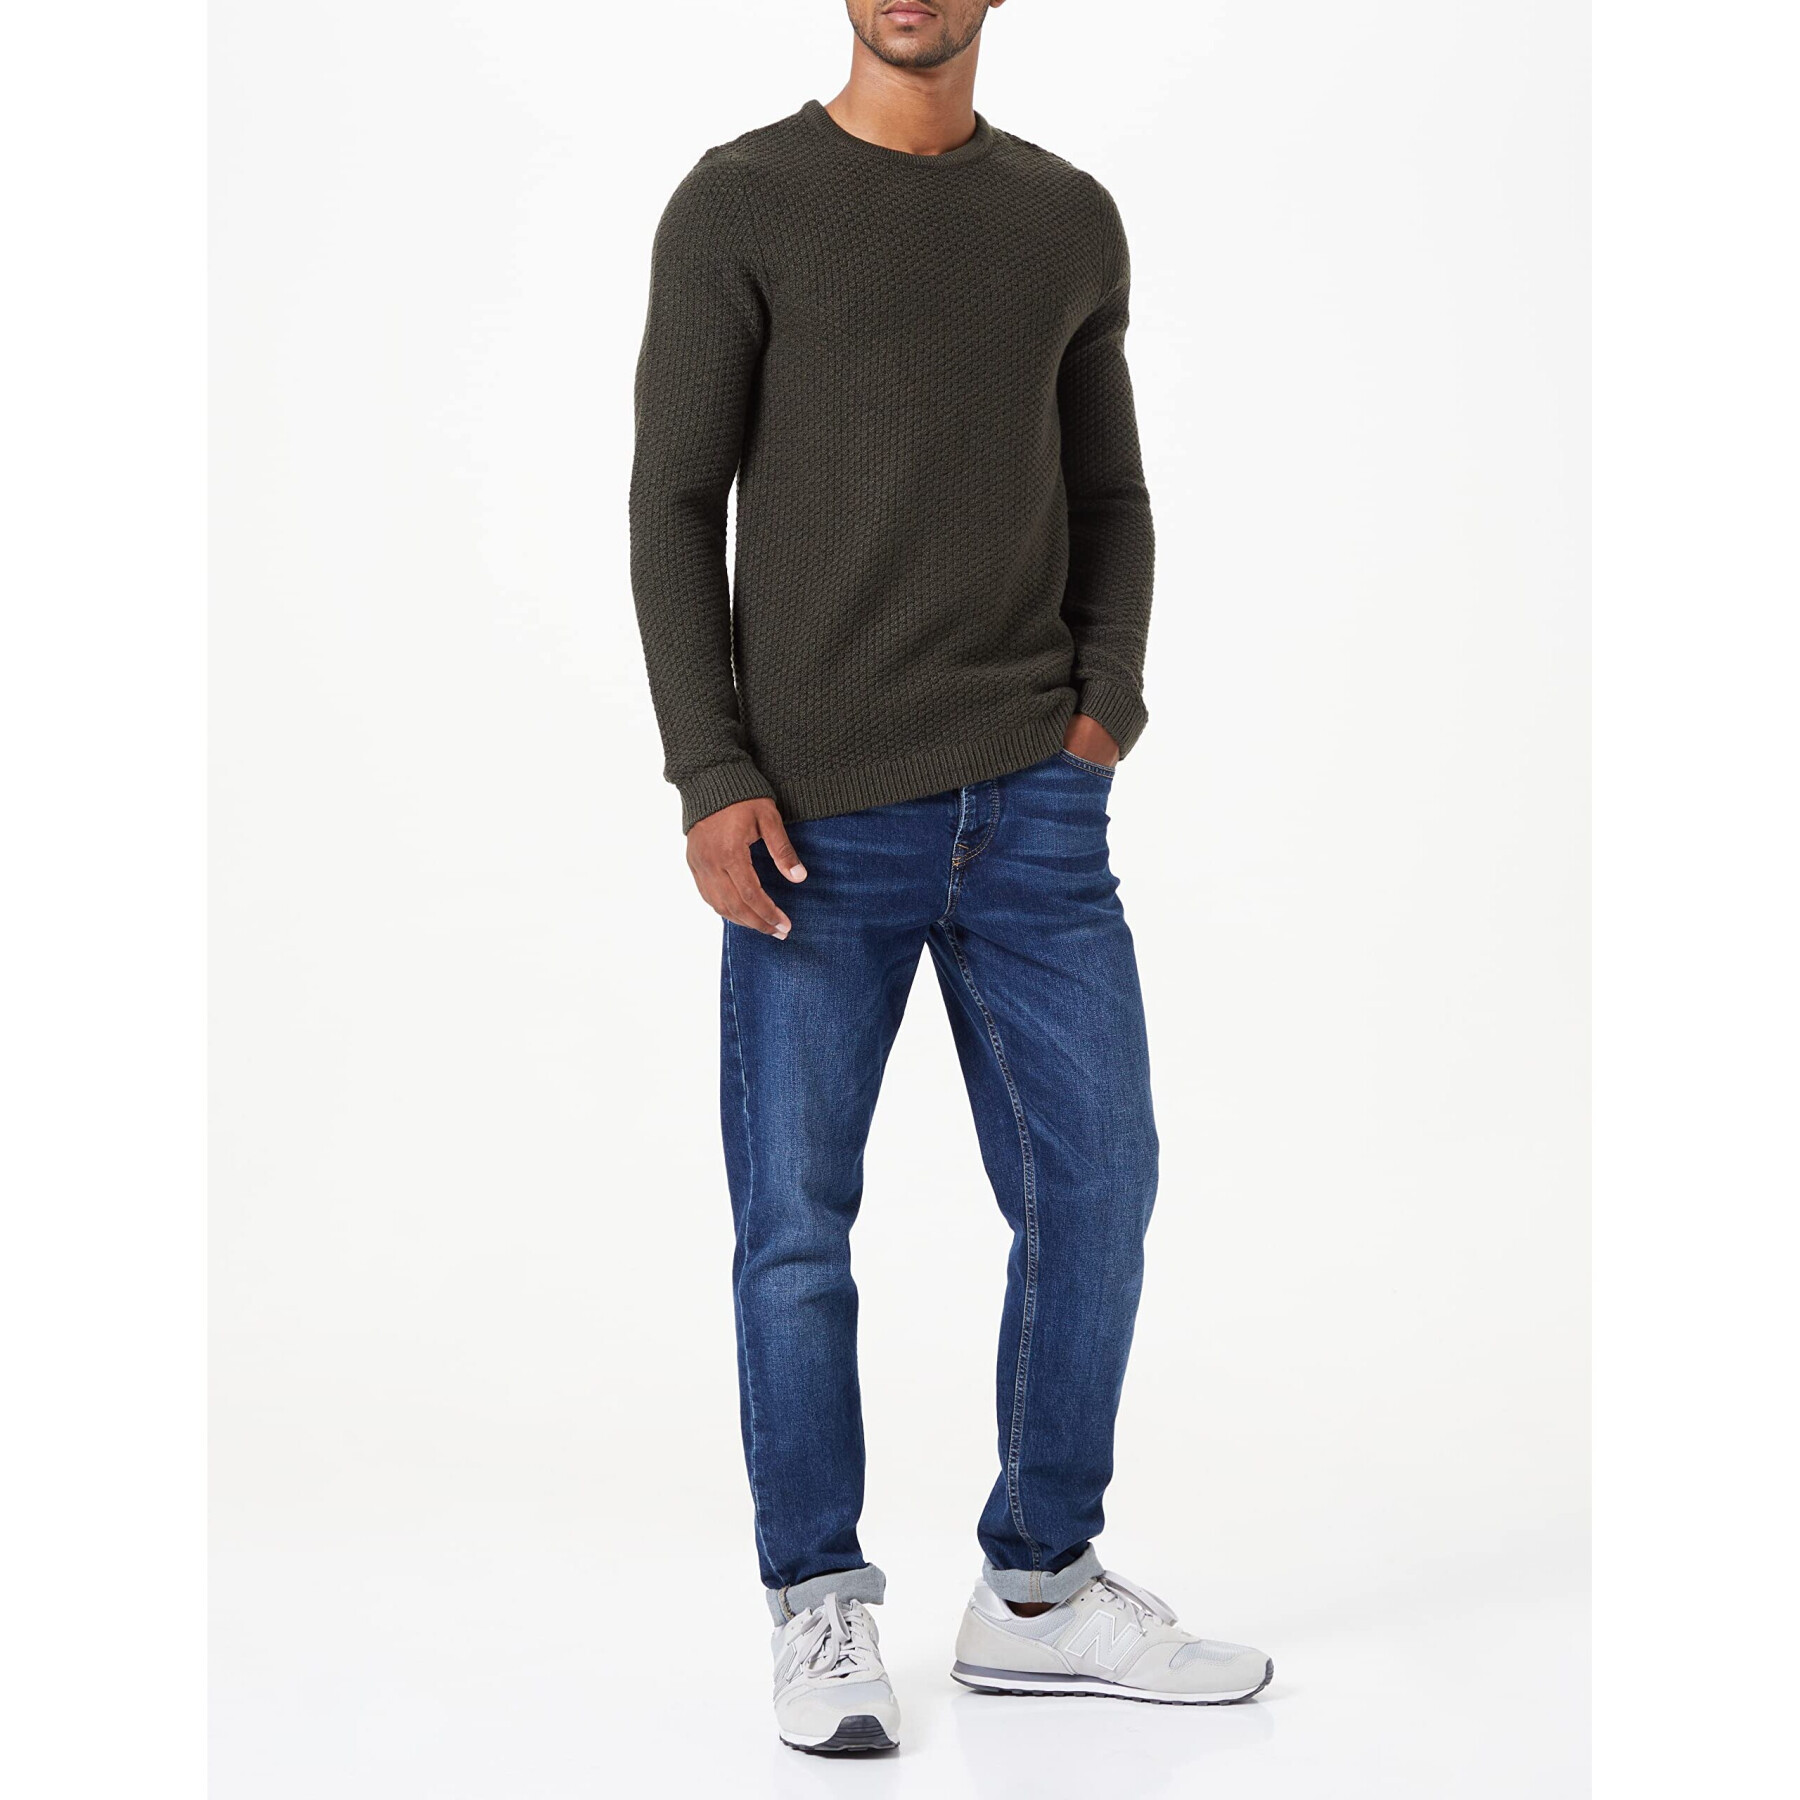 Knitted sweater with round neck Jack & Jones Damian